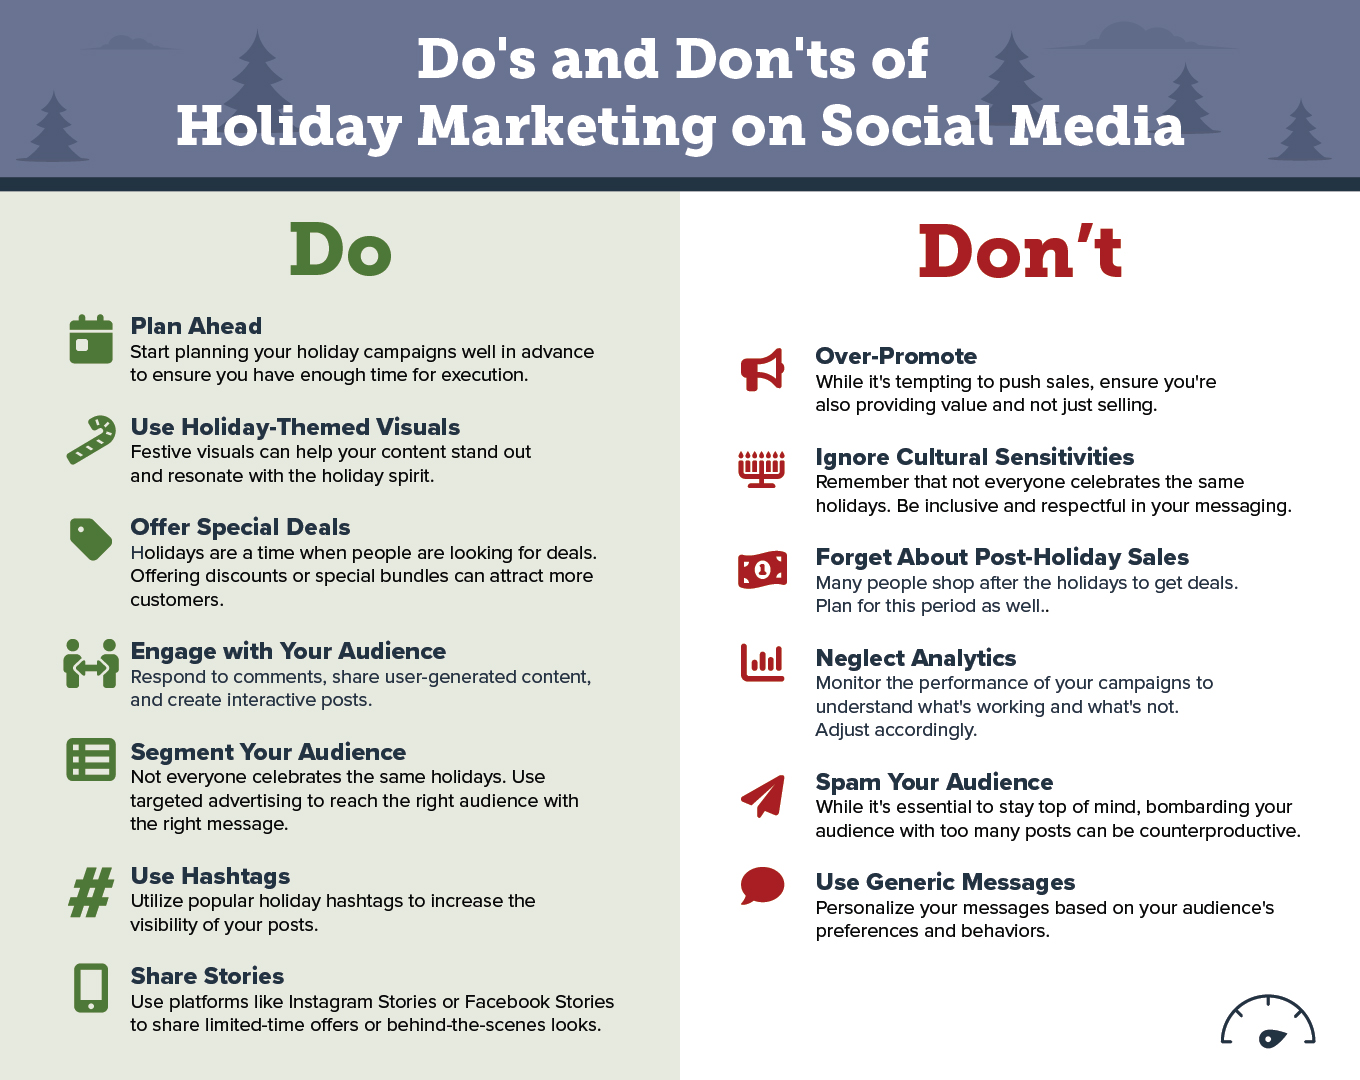 Infographic of two columns, one "do" and the other "don't" with advice on best practices for holiday advertising on social media for small businesses